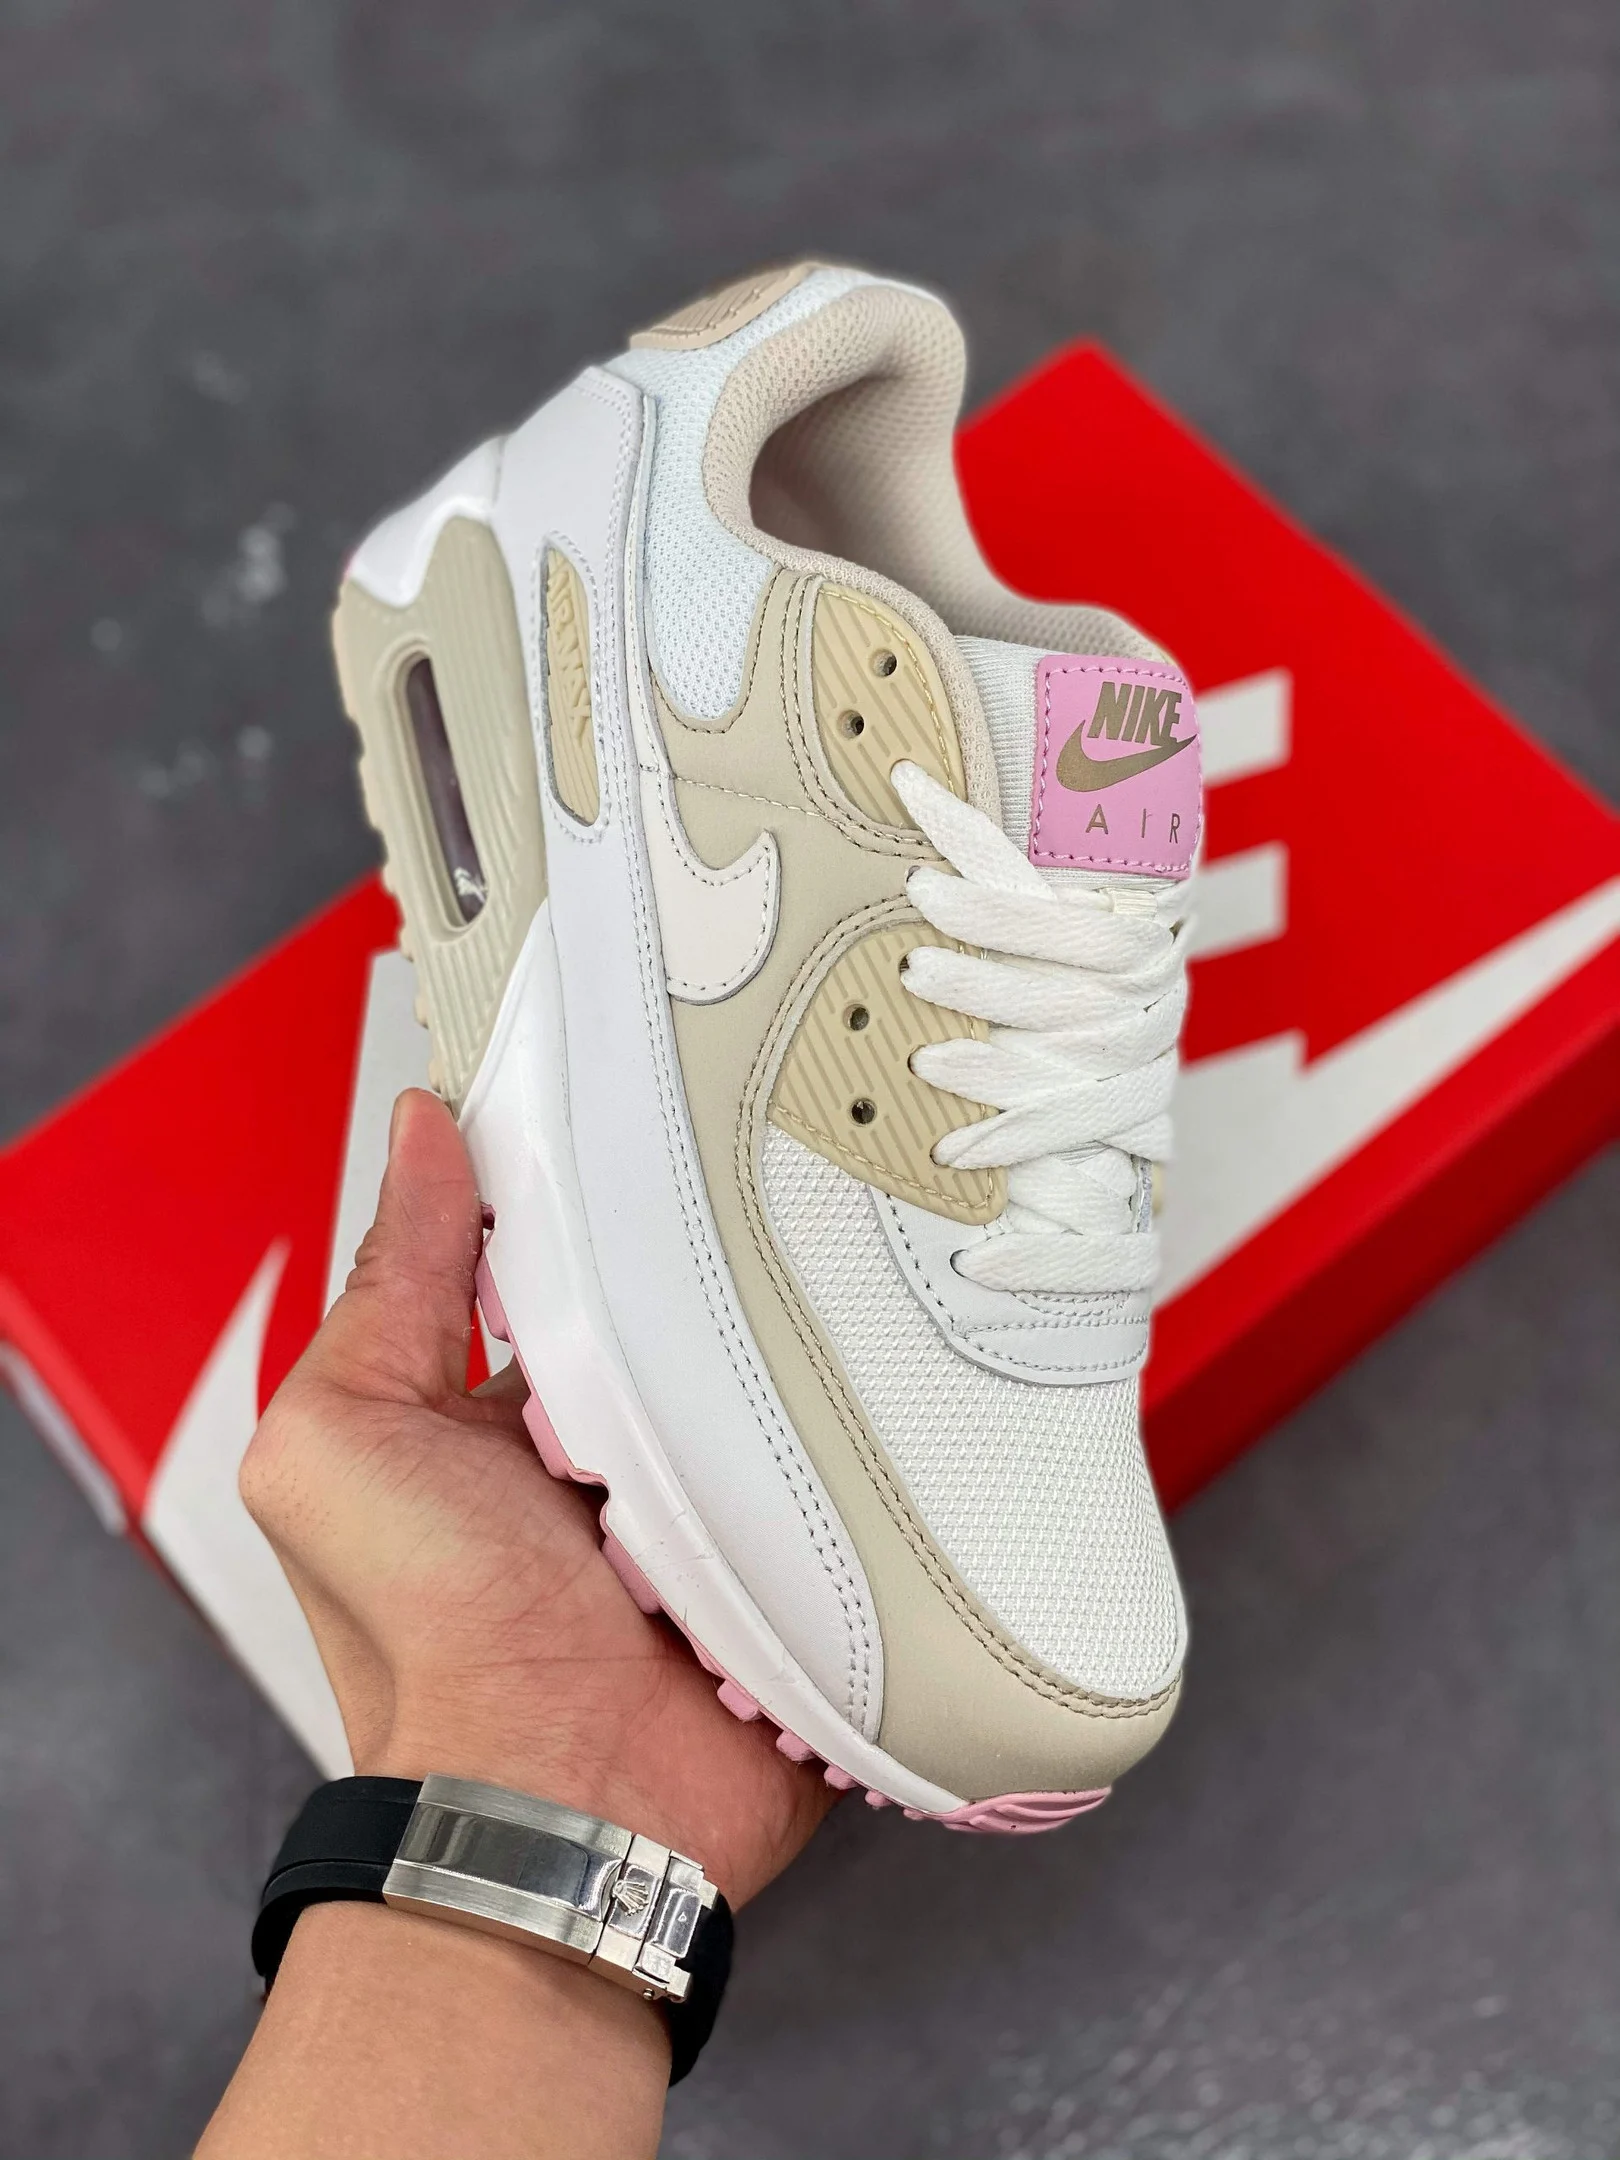 Nike Air Max 90 White Metallic Red Bronze Light Orewood Brown For Sale